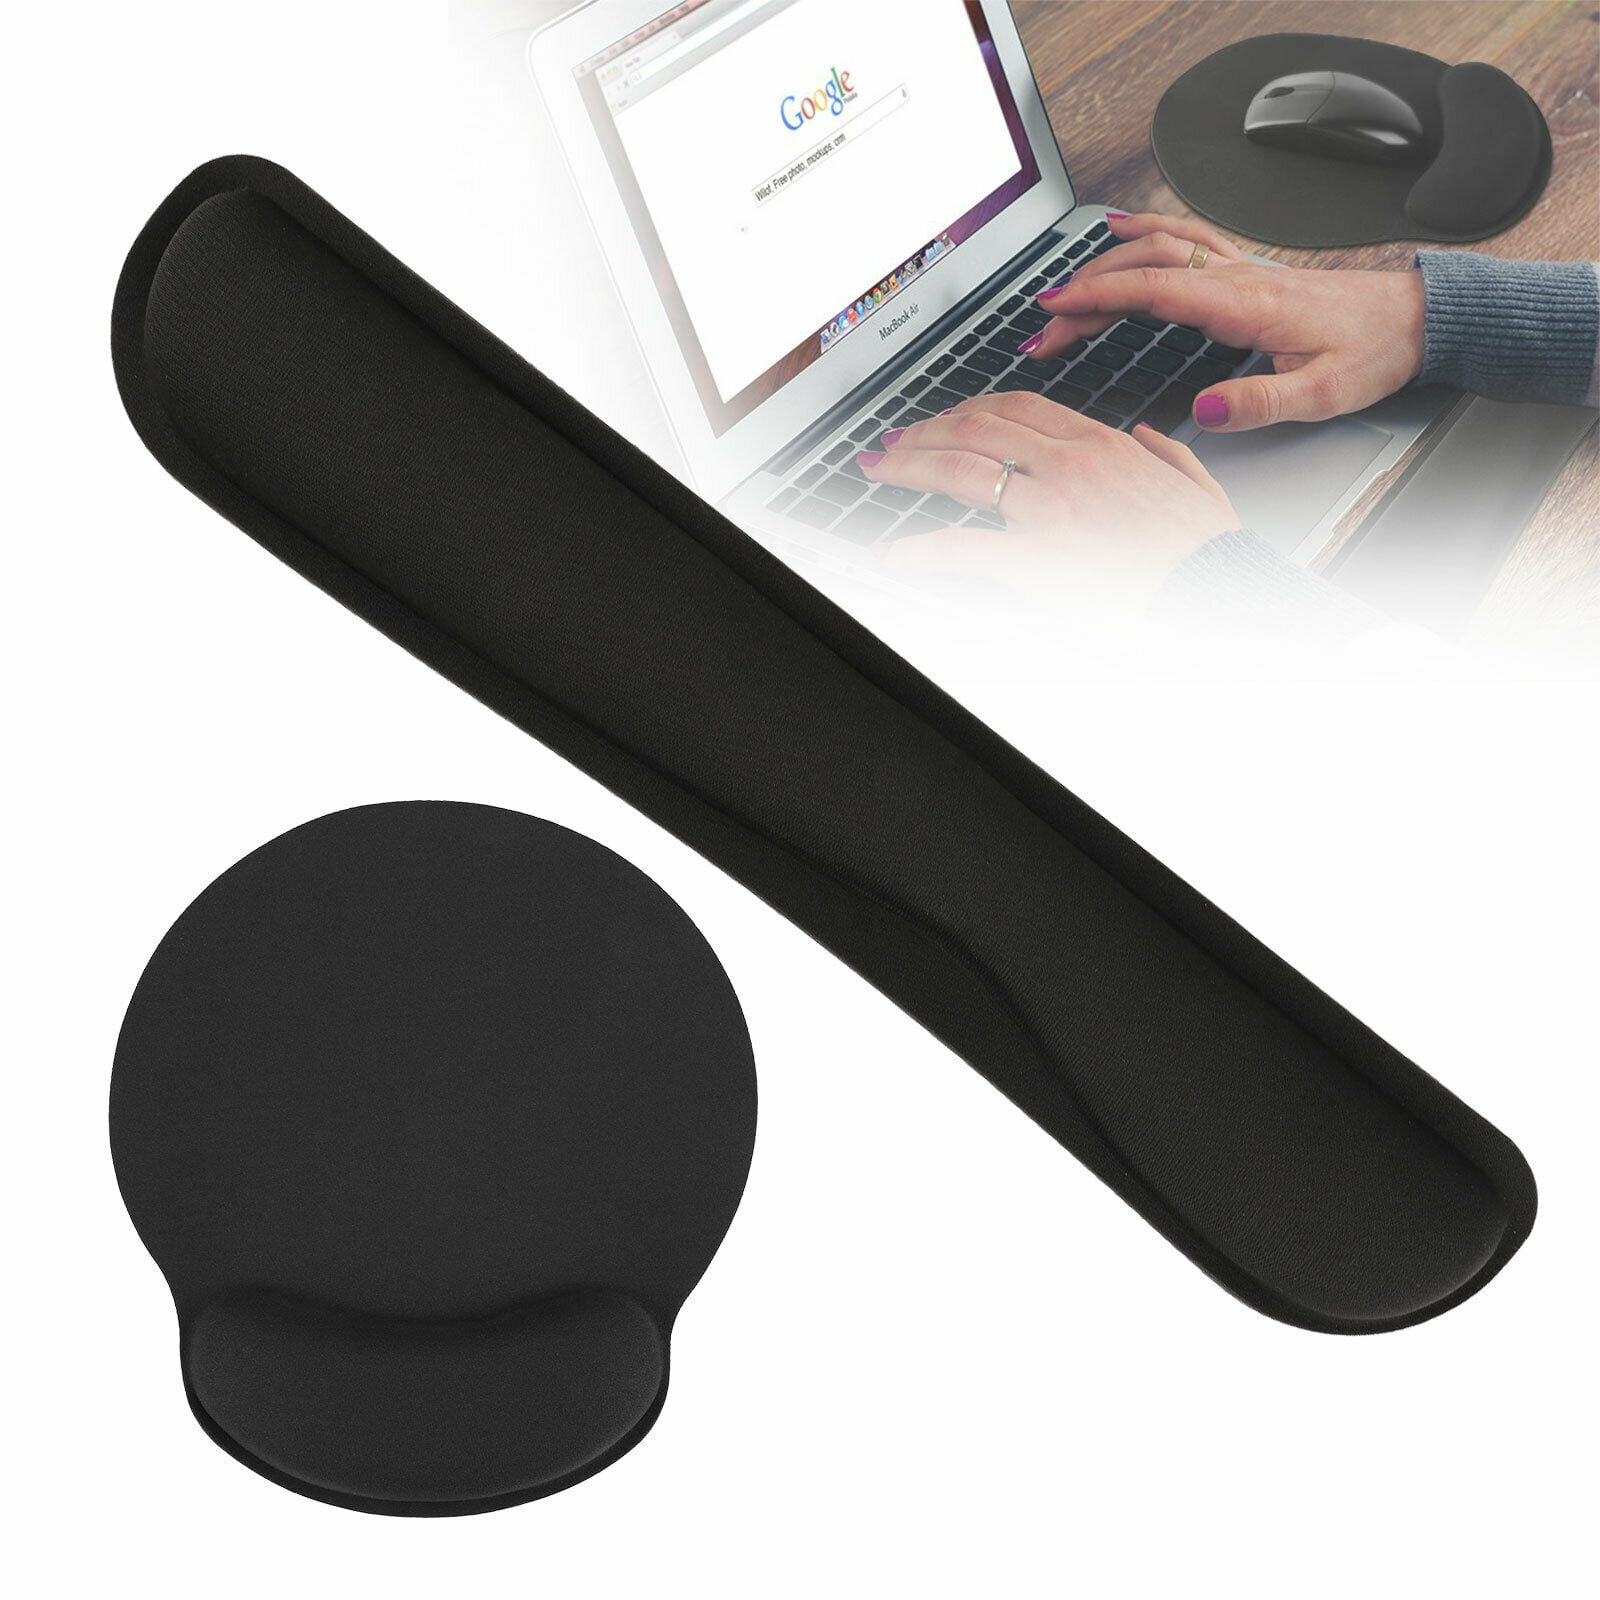 CushionCare Keyboard Wrist Rest Pad Ergonomic Support Made of High-Quality Foam That is Built to Last 3 Years Warranty Mouse Pad Included Provides Comfort and Support to Hands While Typing